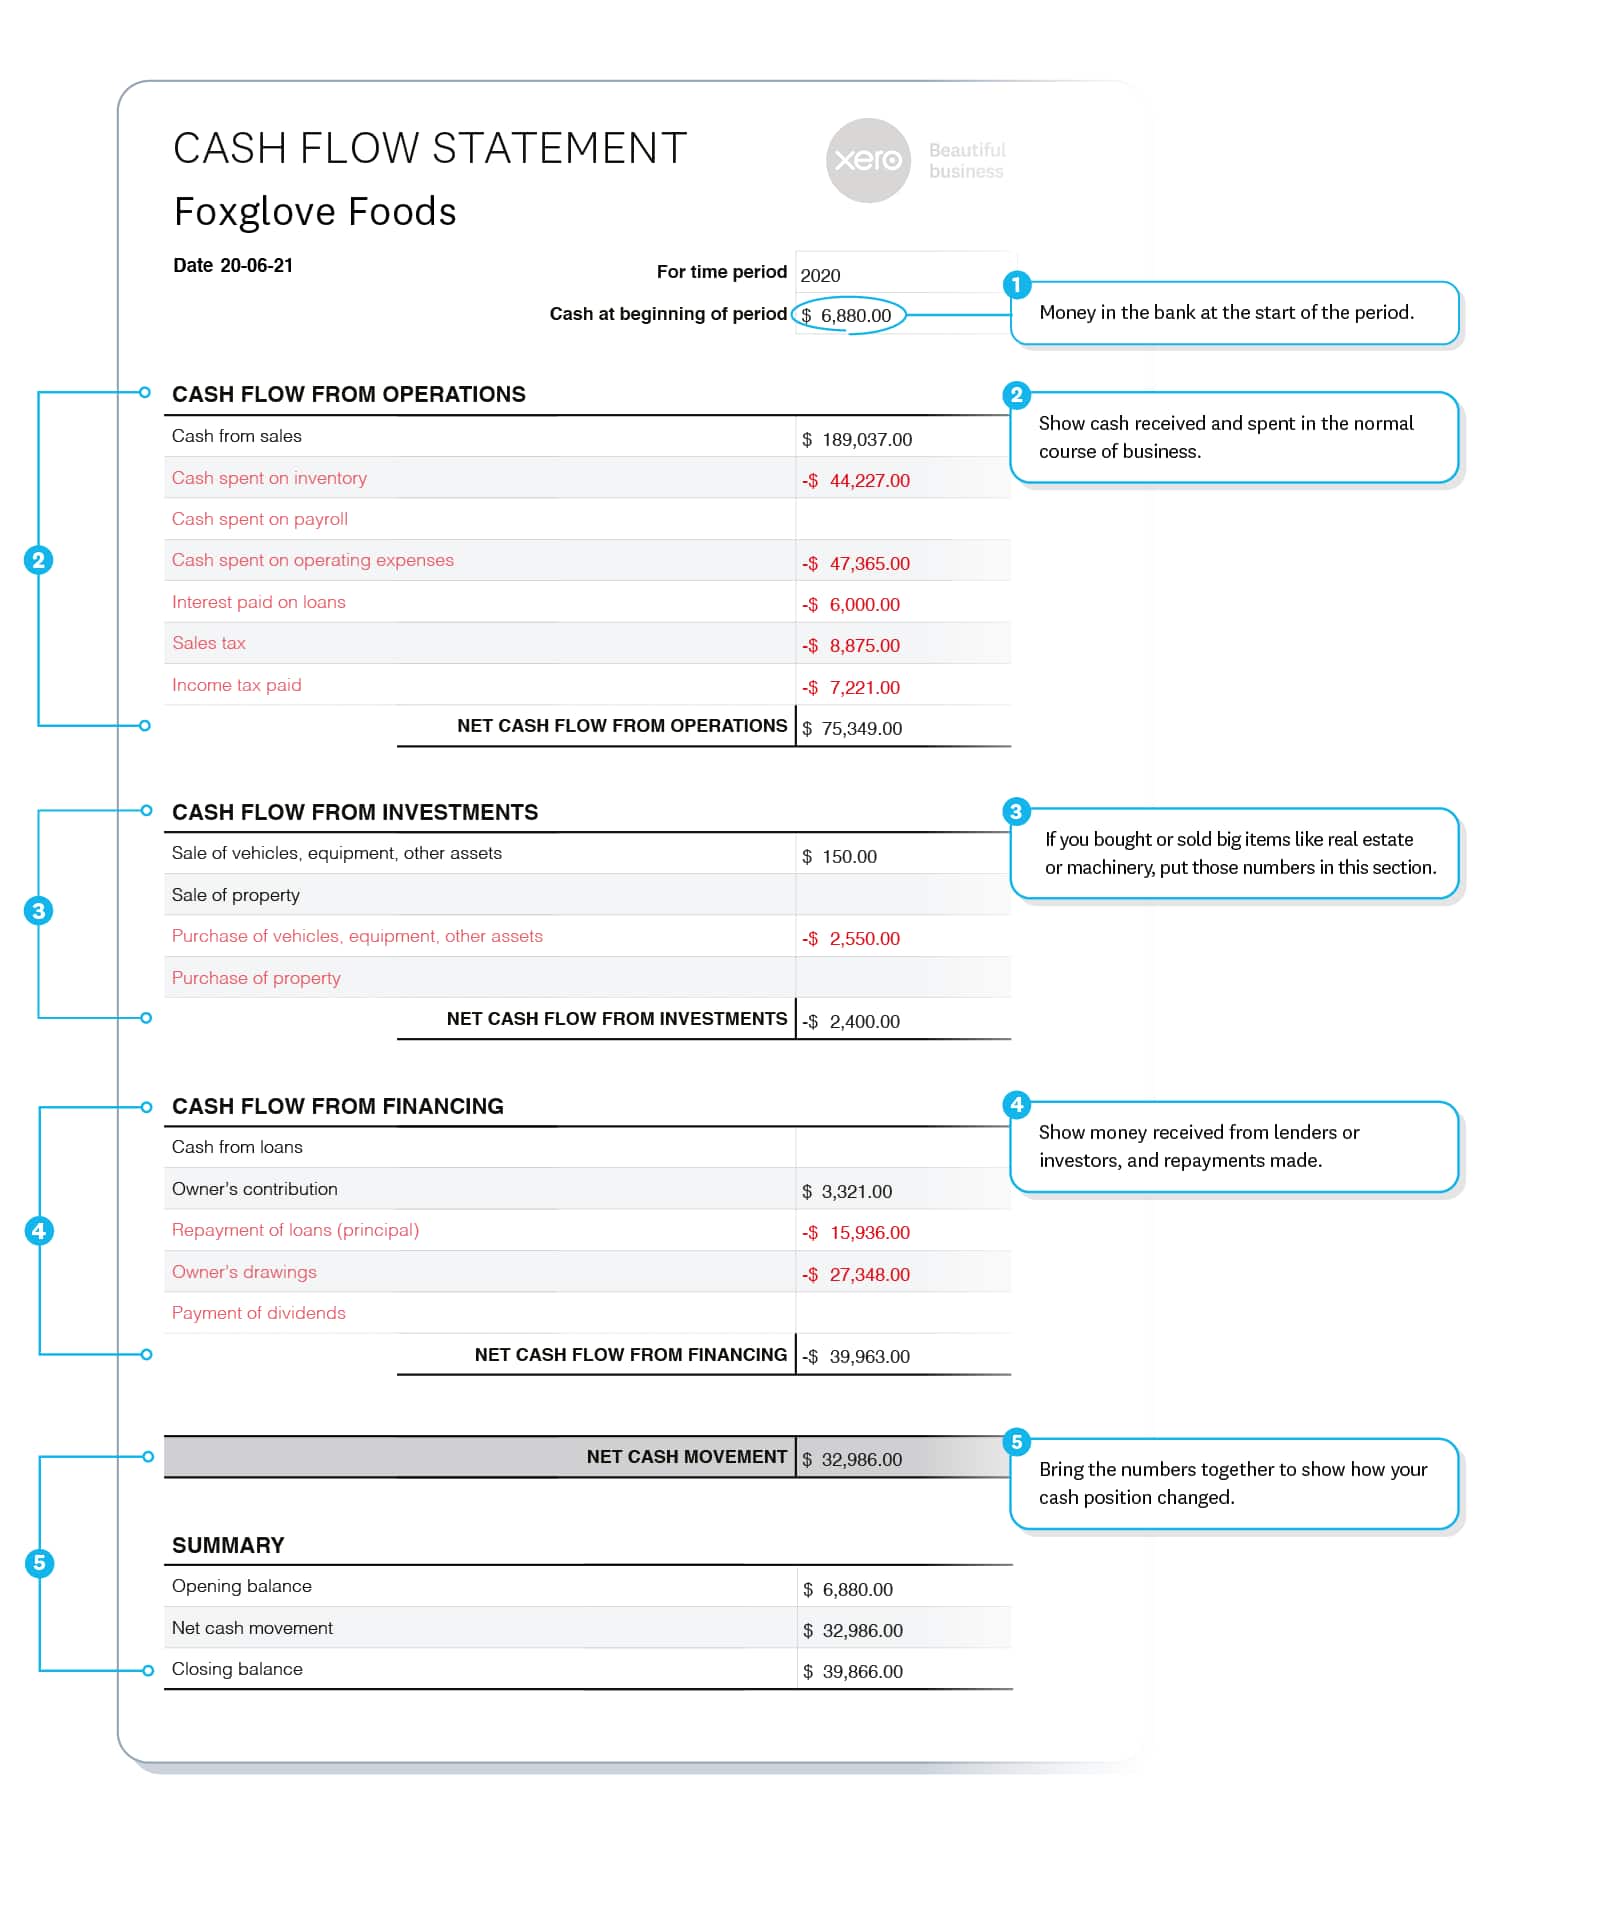 Cash flow statement example shows money in and out from operations, investments and financing.